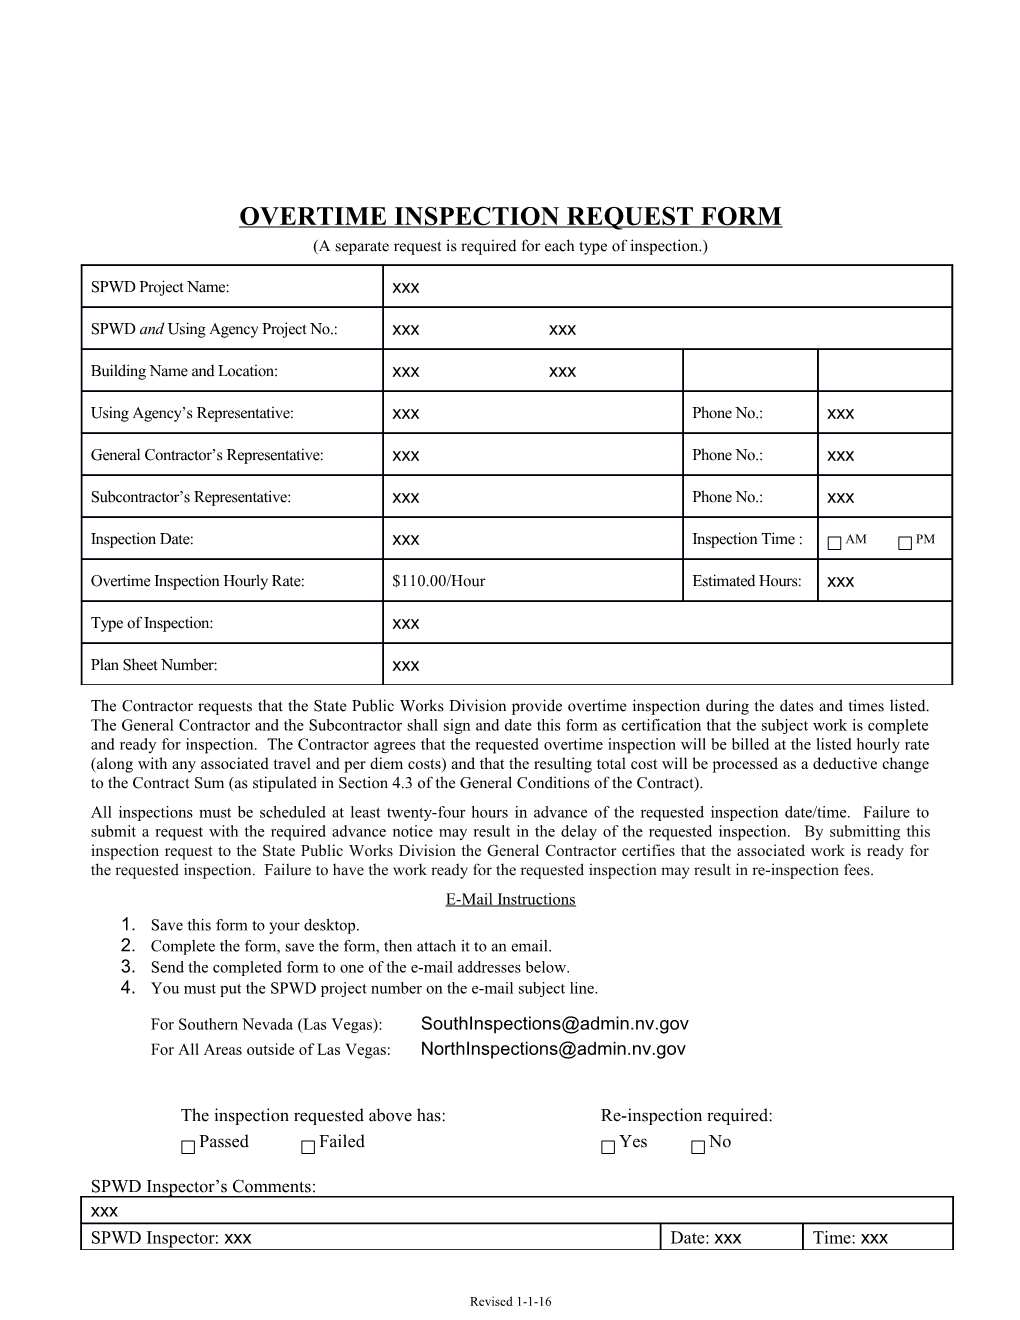 Overtime Inspection Request Form